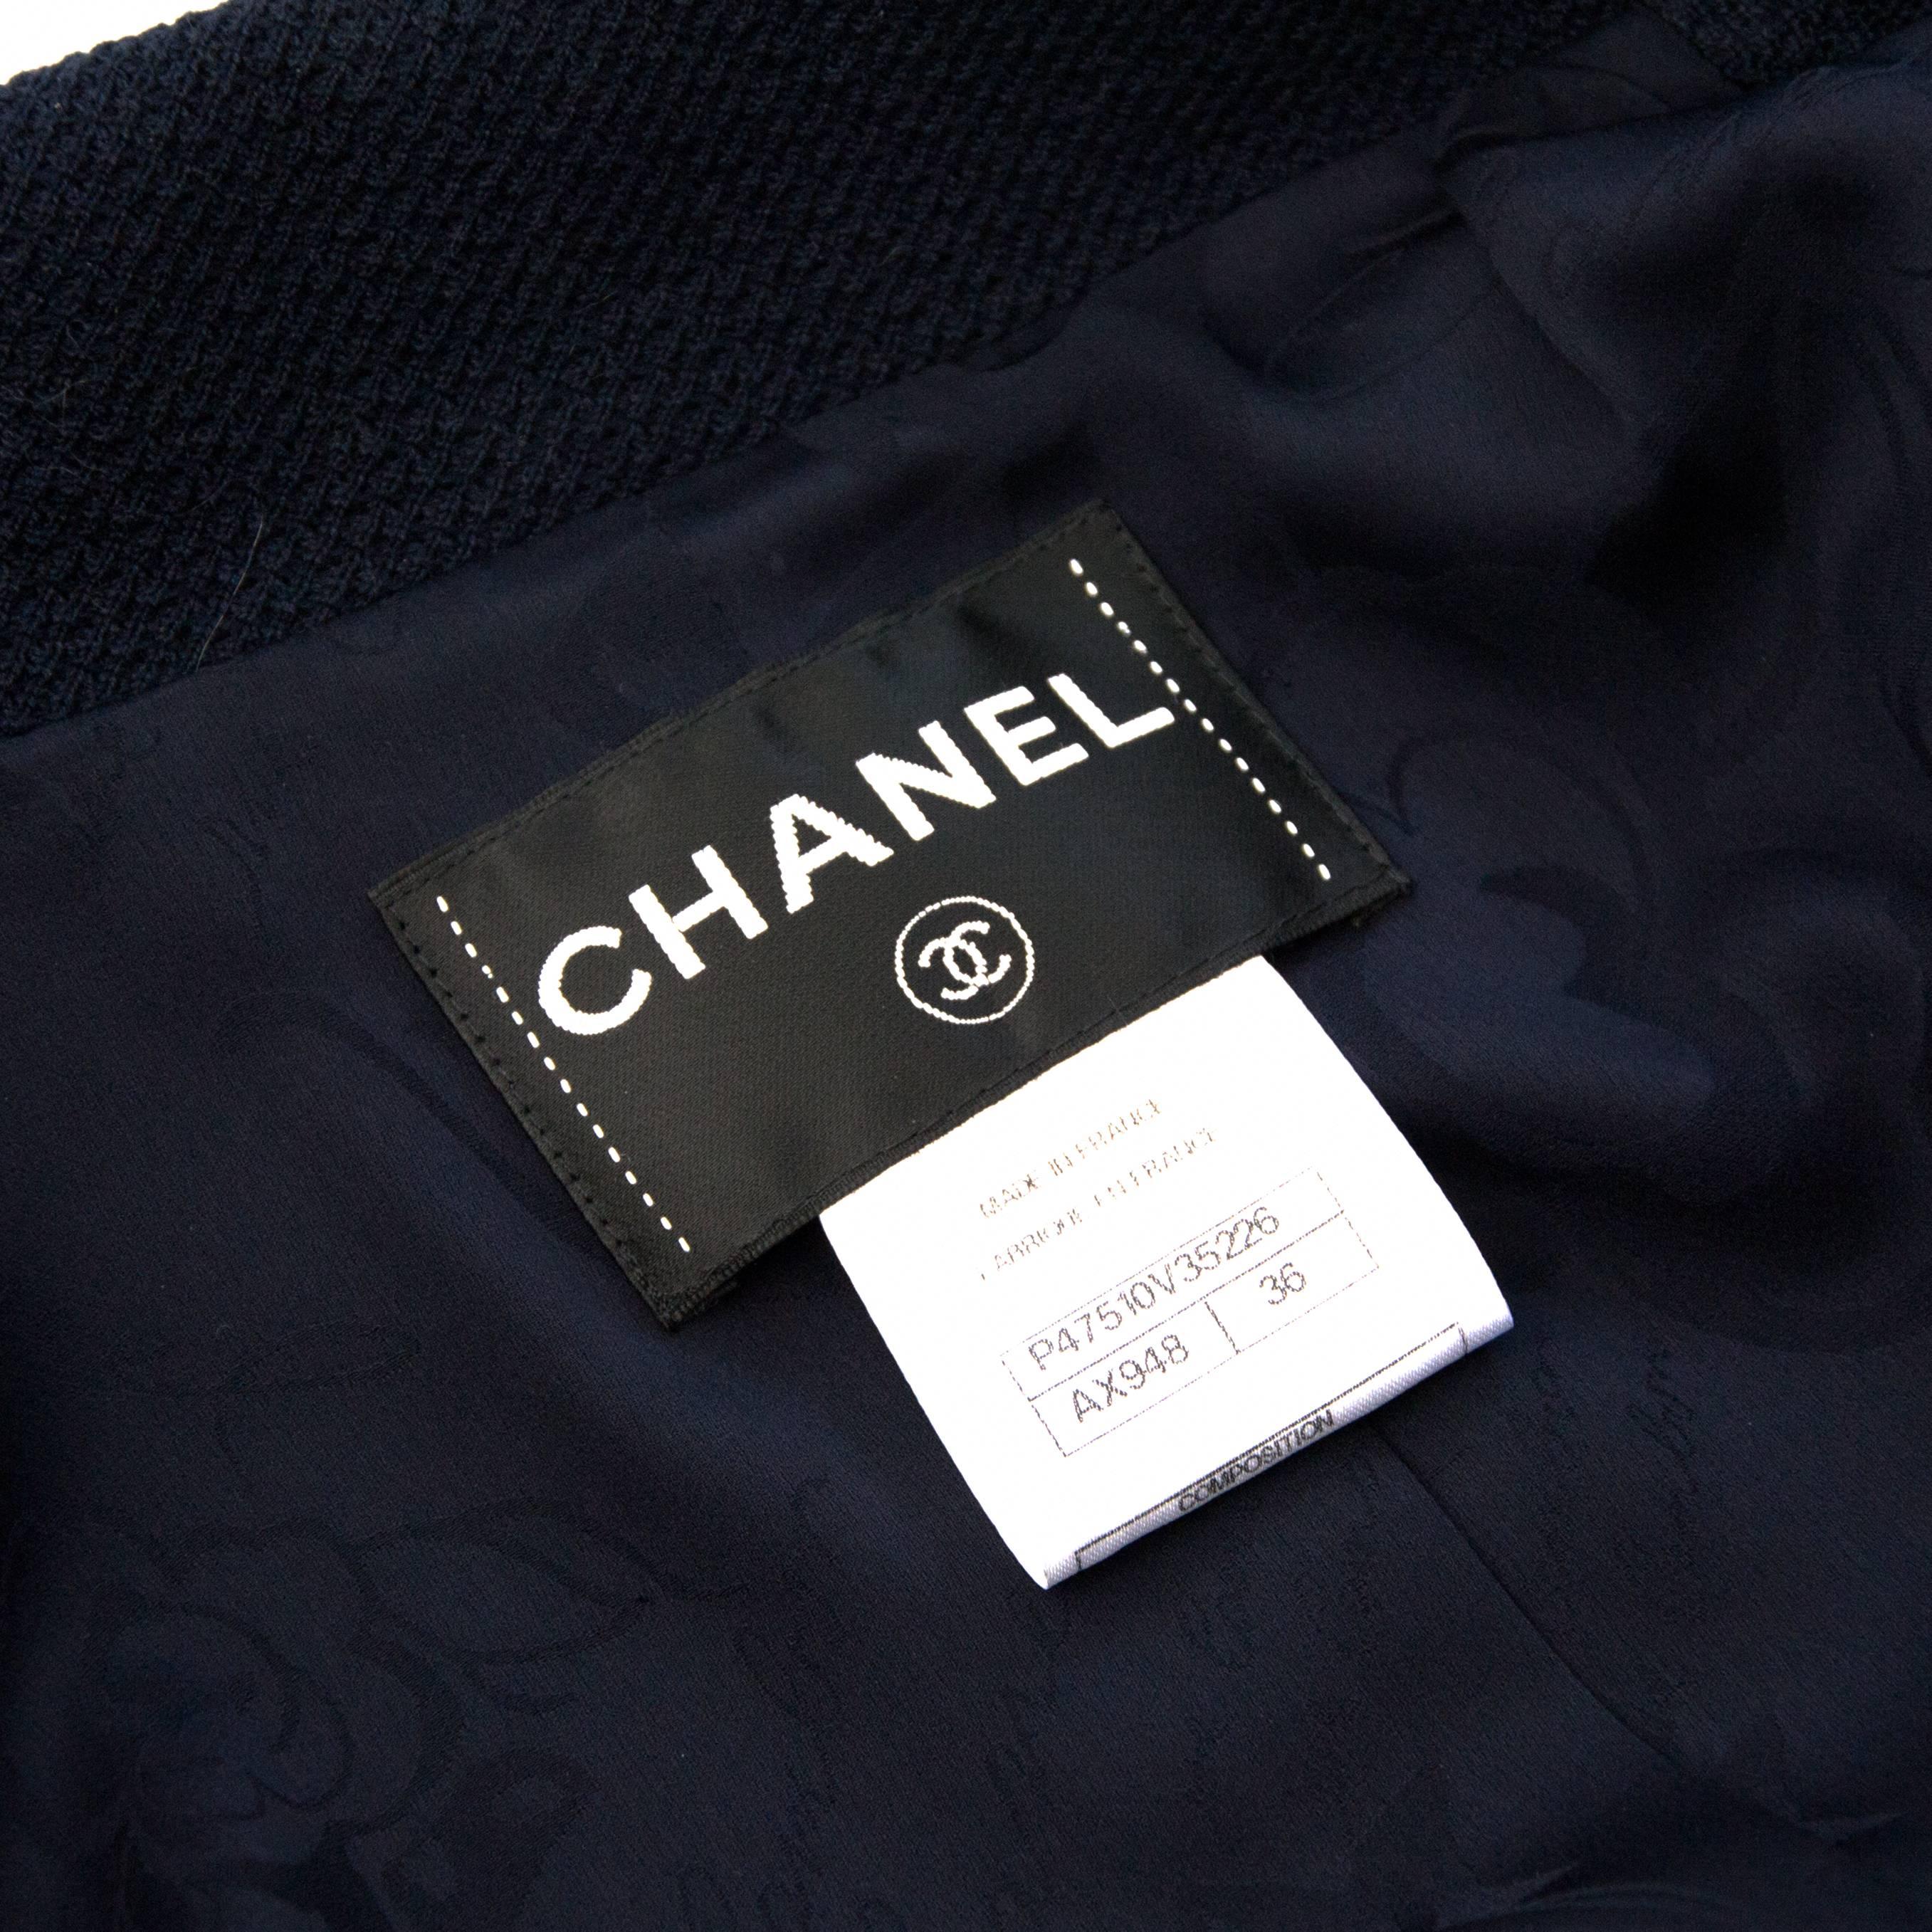 Chanel Blue Blazer  In Excellent Condition For Sale In Antwerp, BE